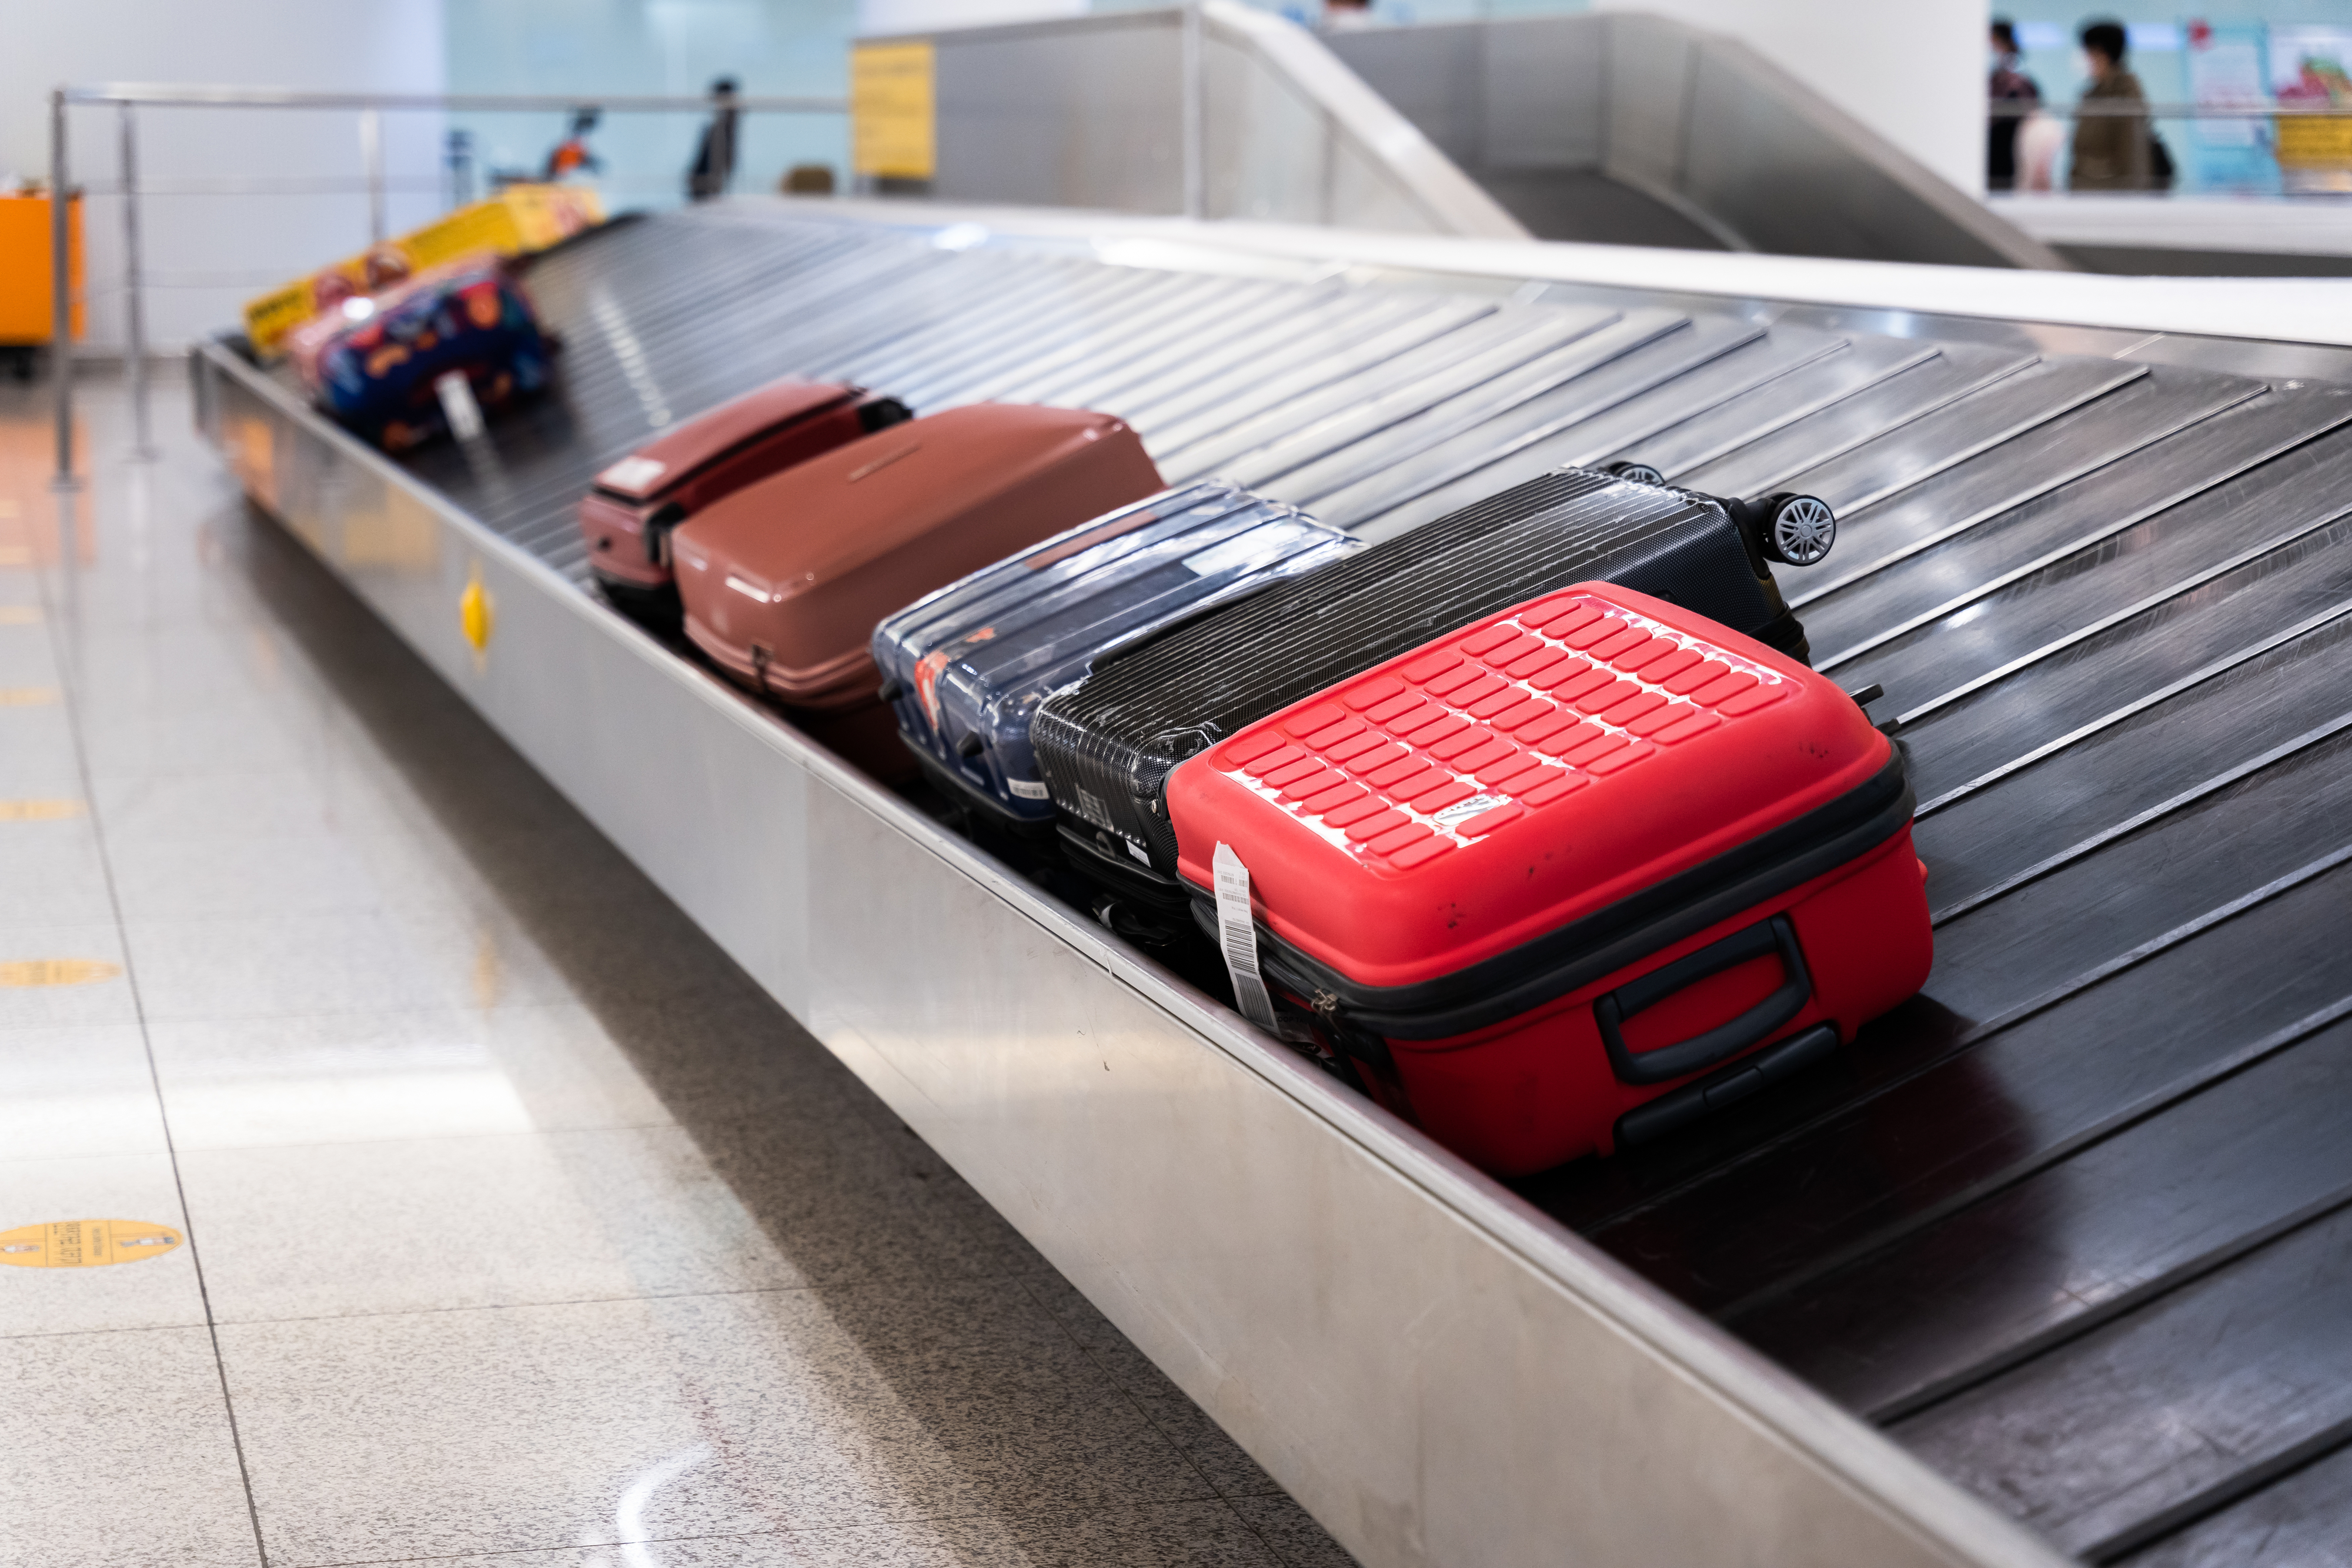 Luggage in the baggage claim carousel